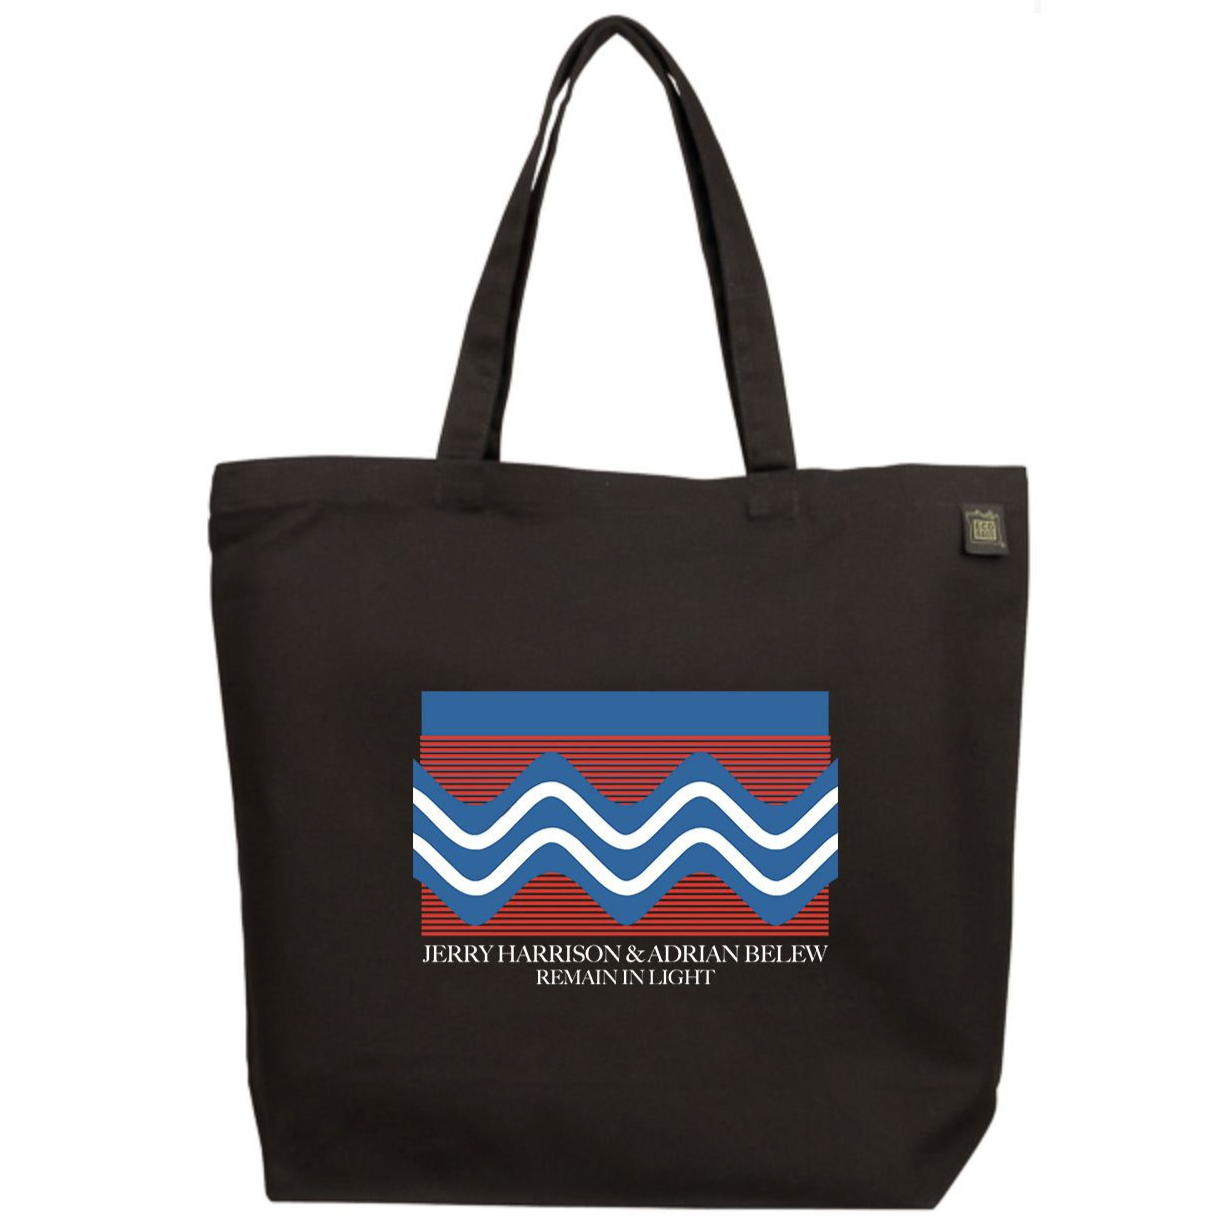 Remain in Light - Wave Tote Bag